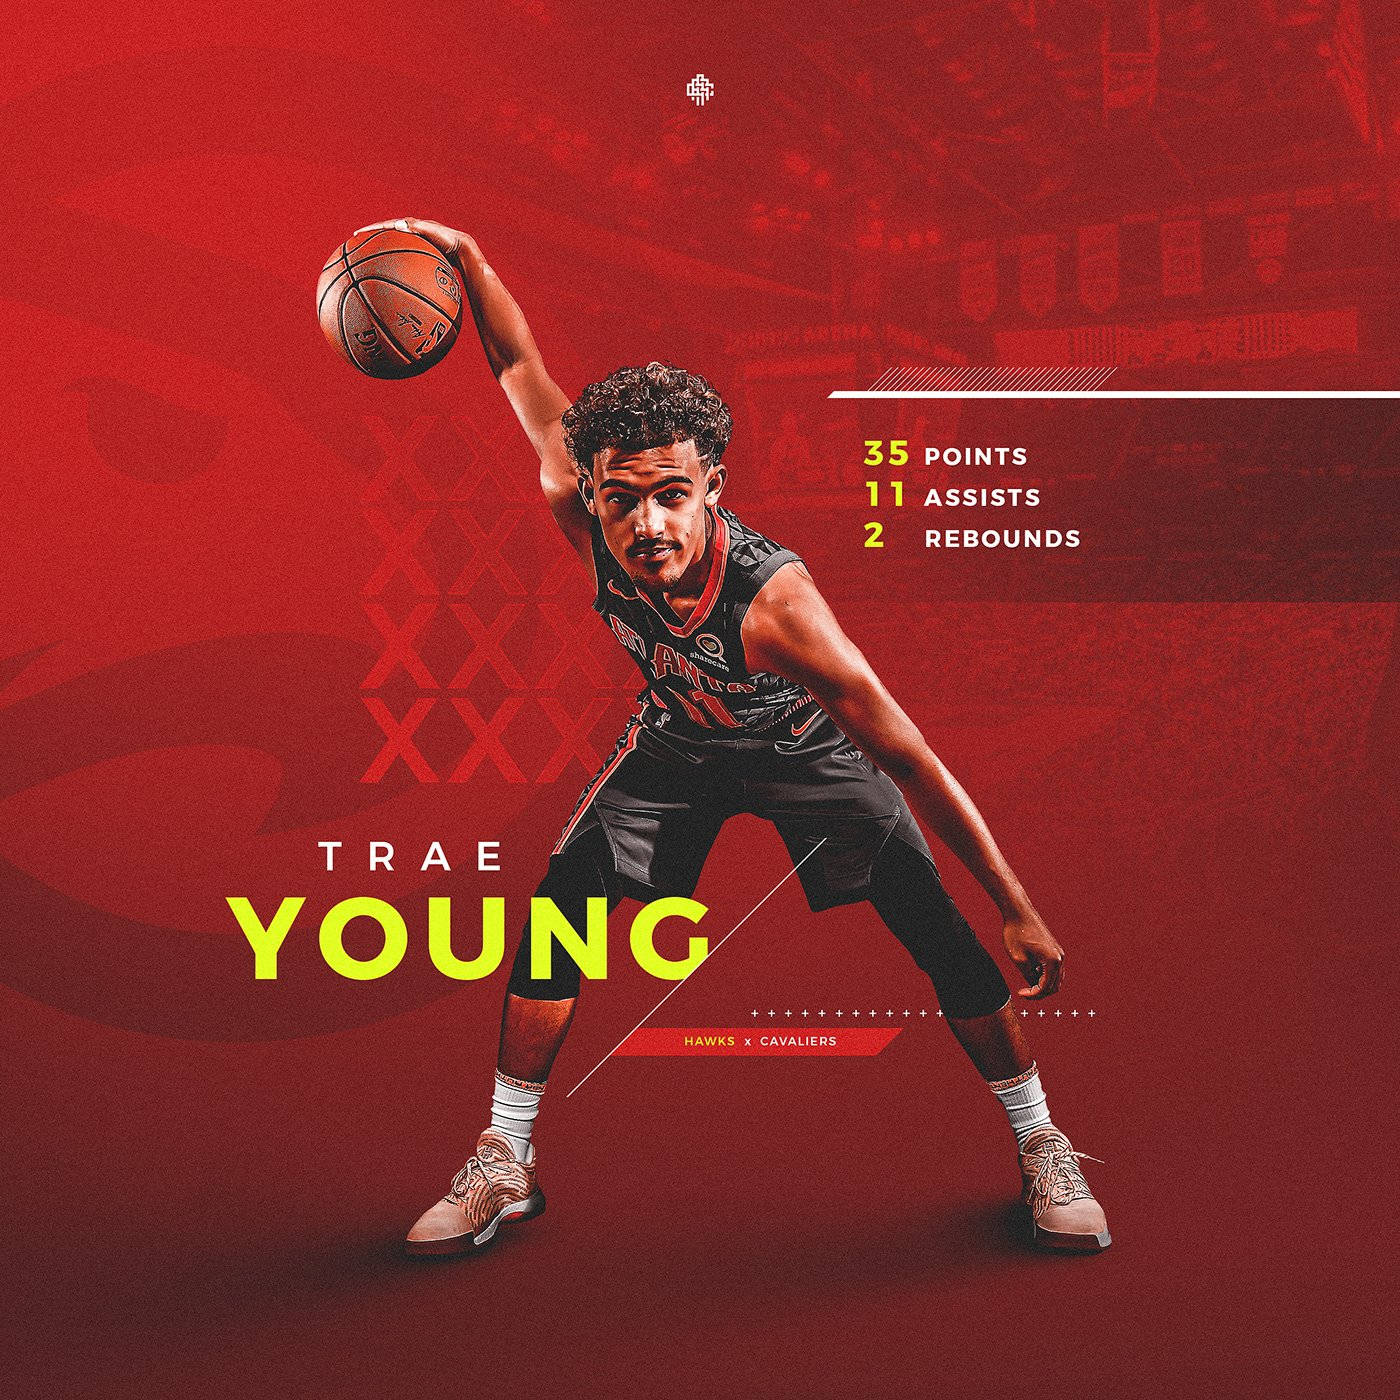 Download Ice Trae Young Art Wallpaper